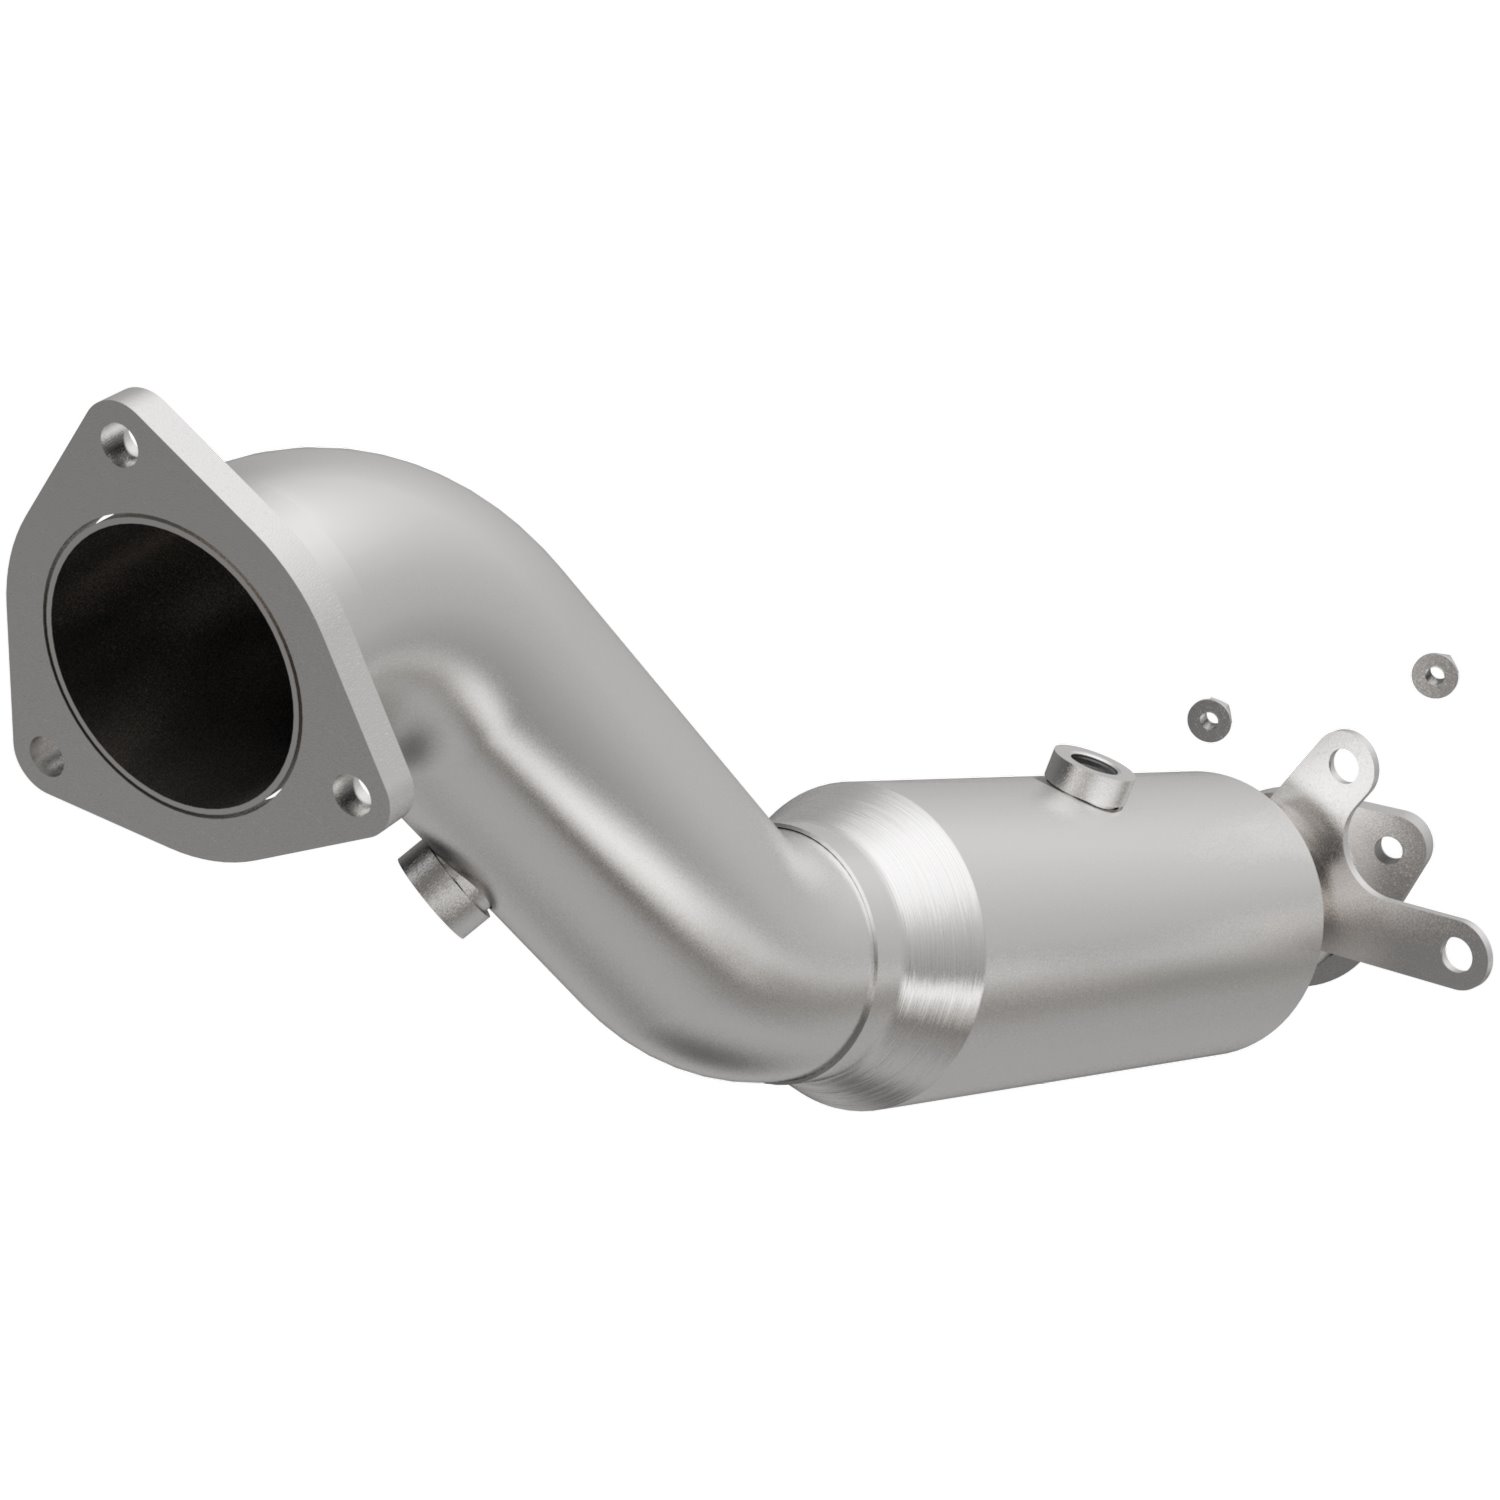 OEM Grade Federal / EPA Compliant Direct-Fit Catalytic Converter 21-477